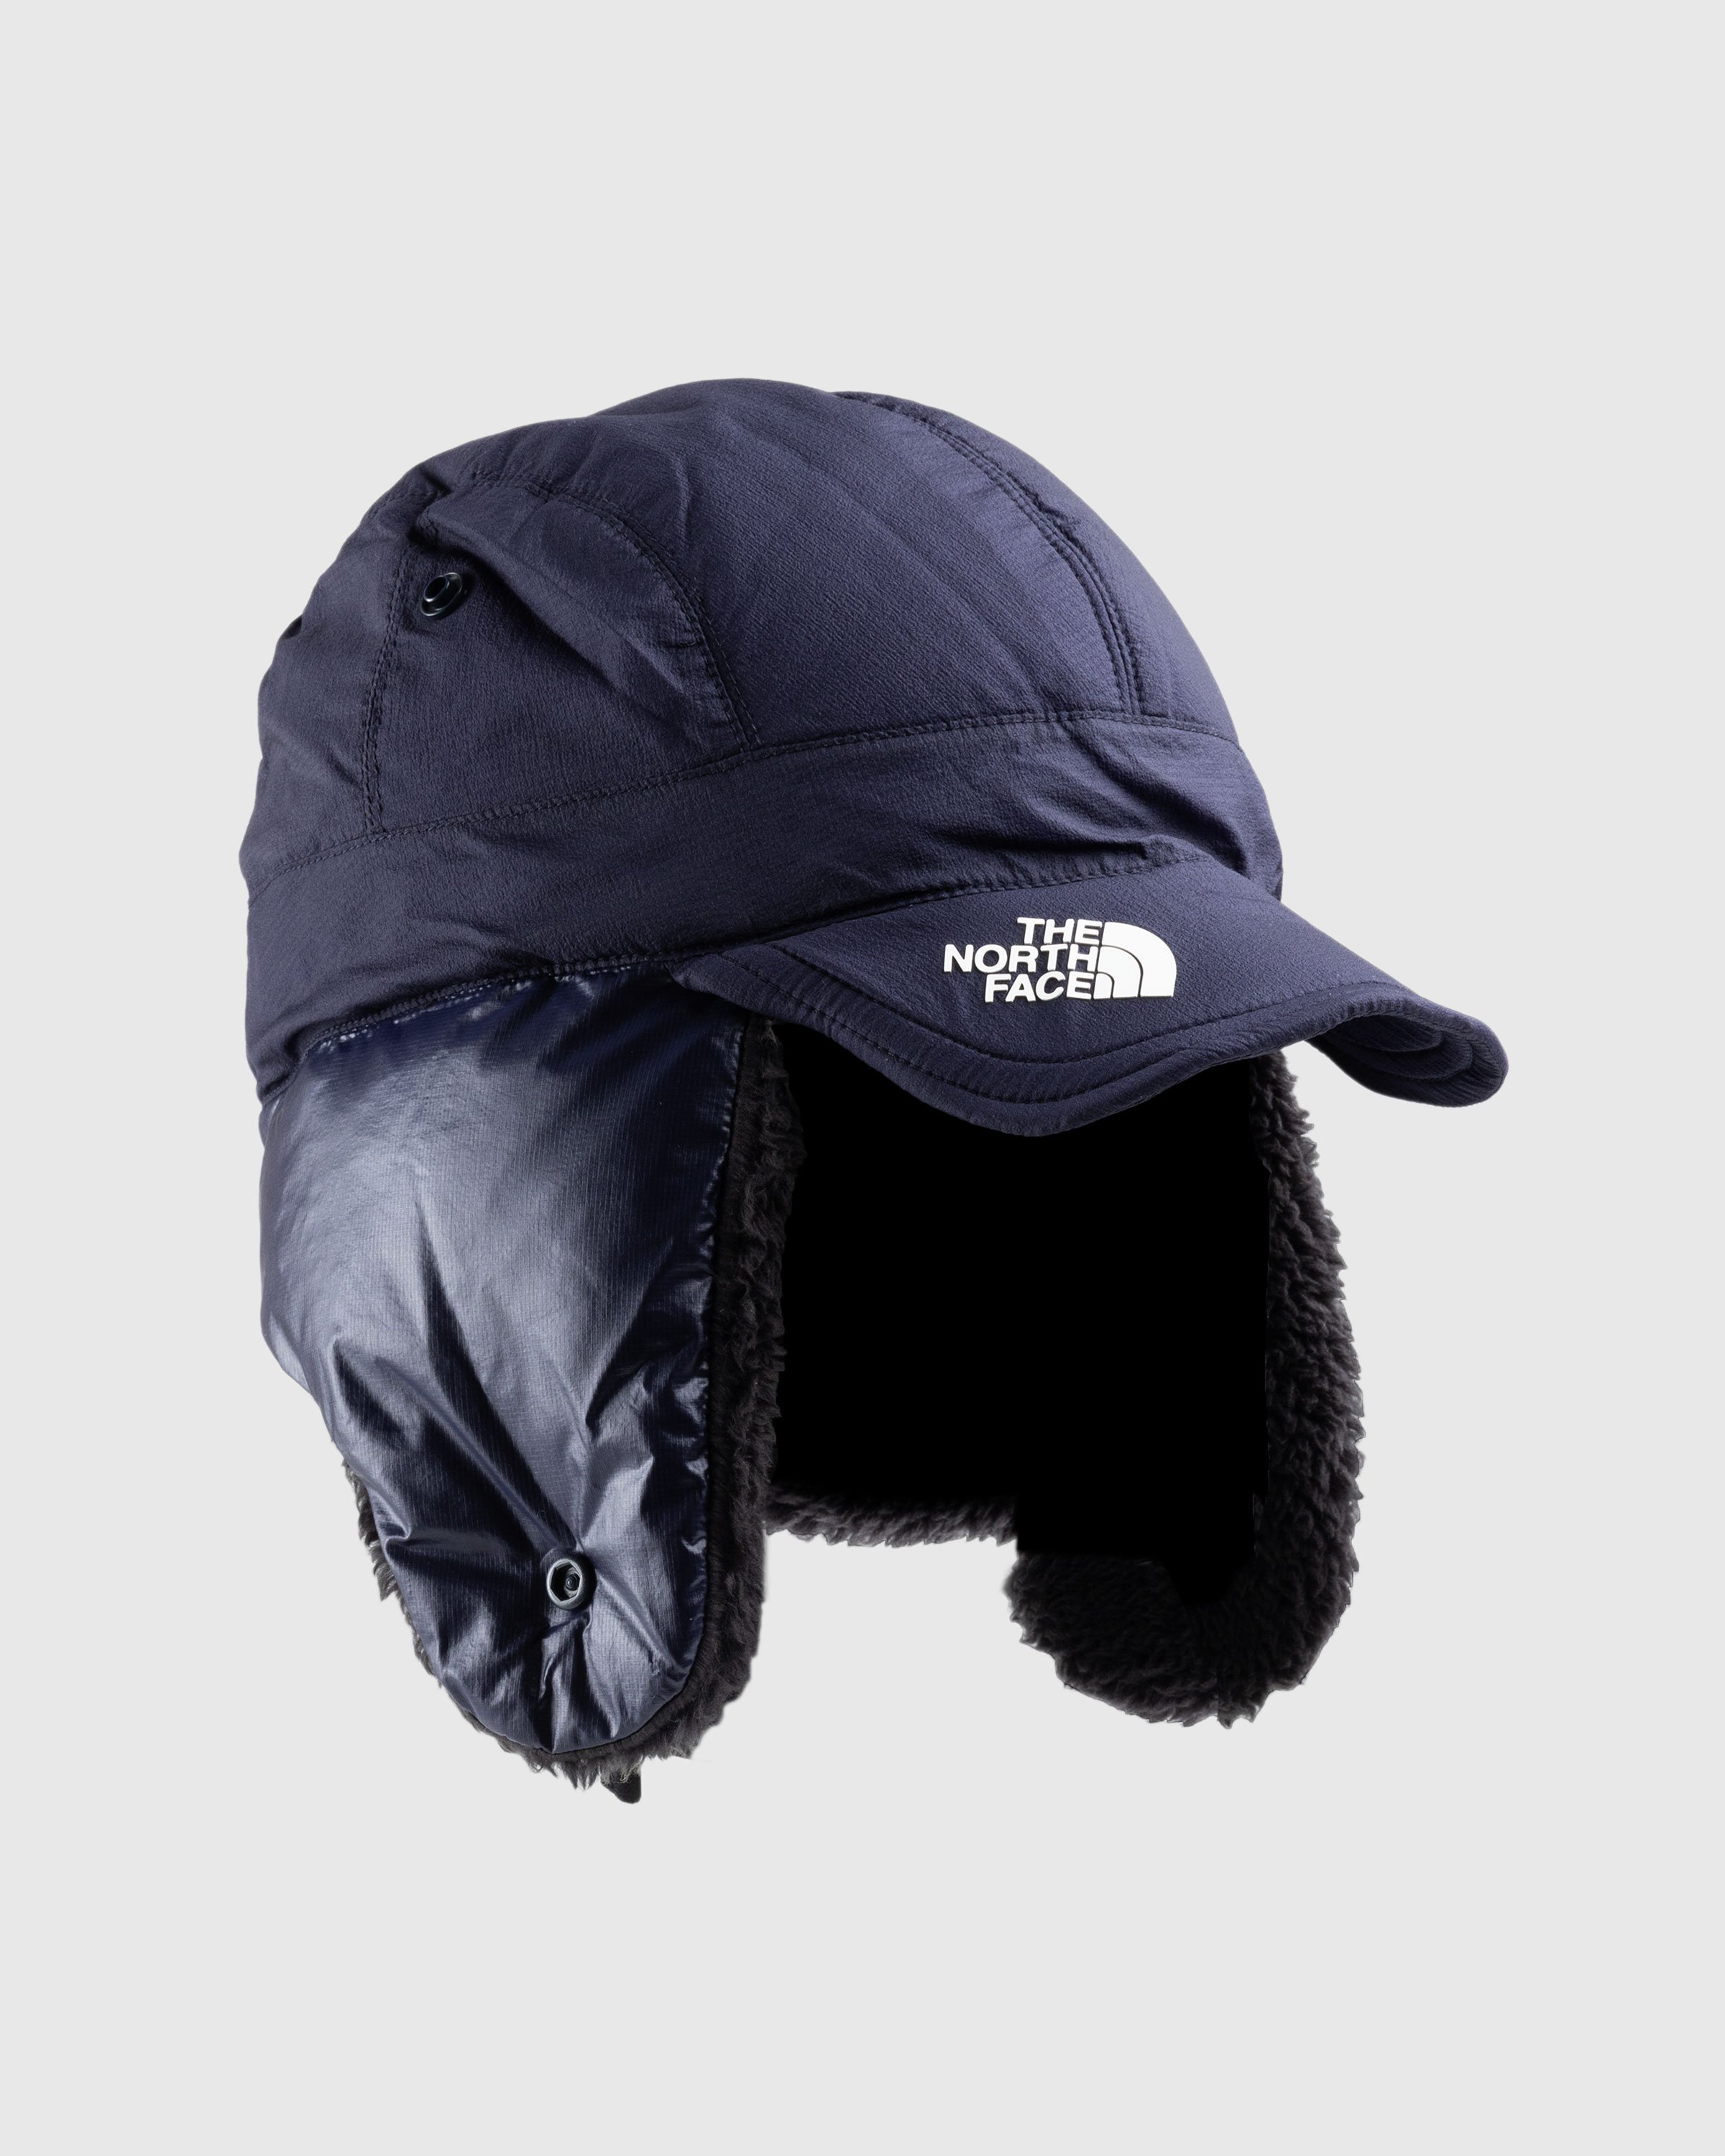 The North Face x UNDERCOVER - Soukuu Down Cap Black/Navy - Accessories - Multi - Image 3